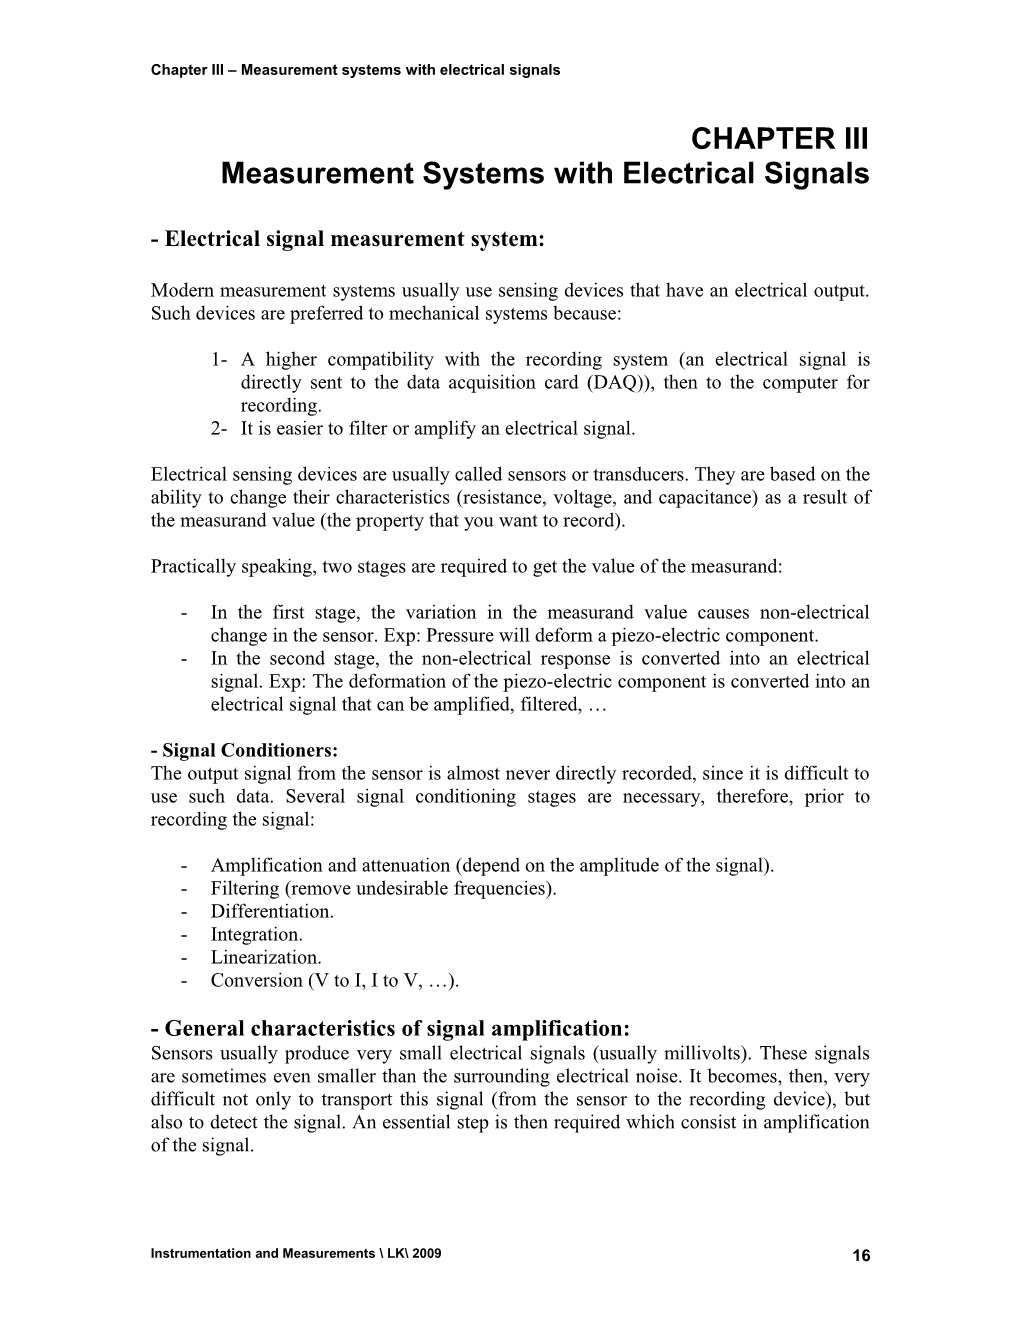 Chapter III Measurement Systems with Electrical Signals